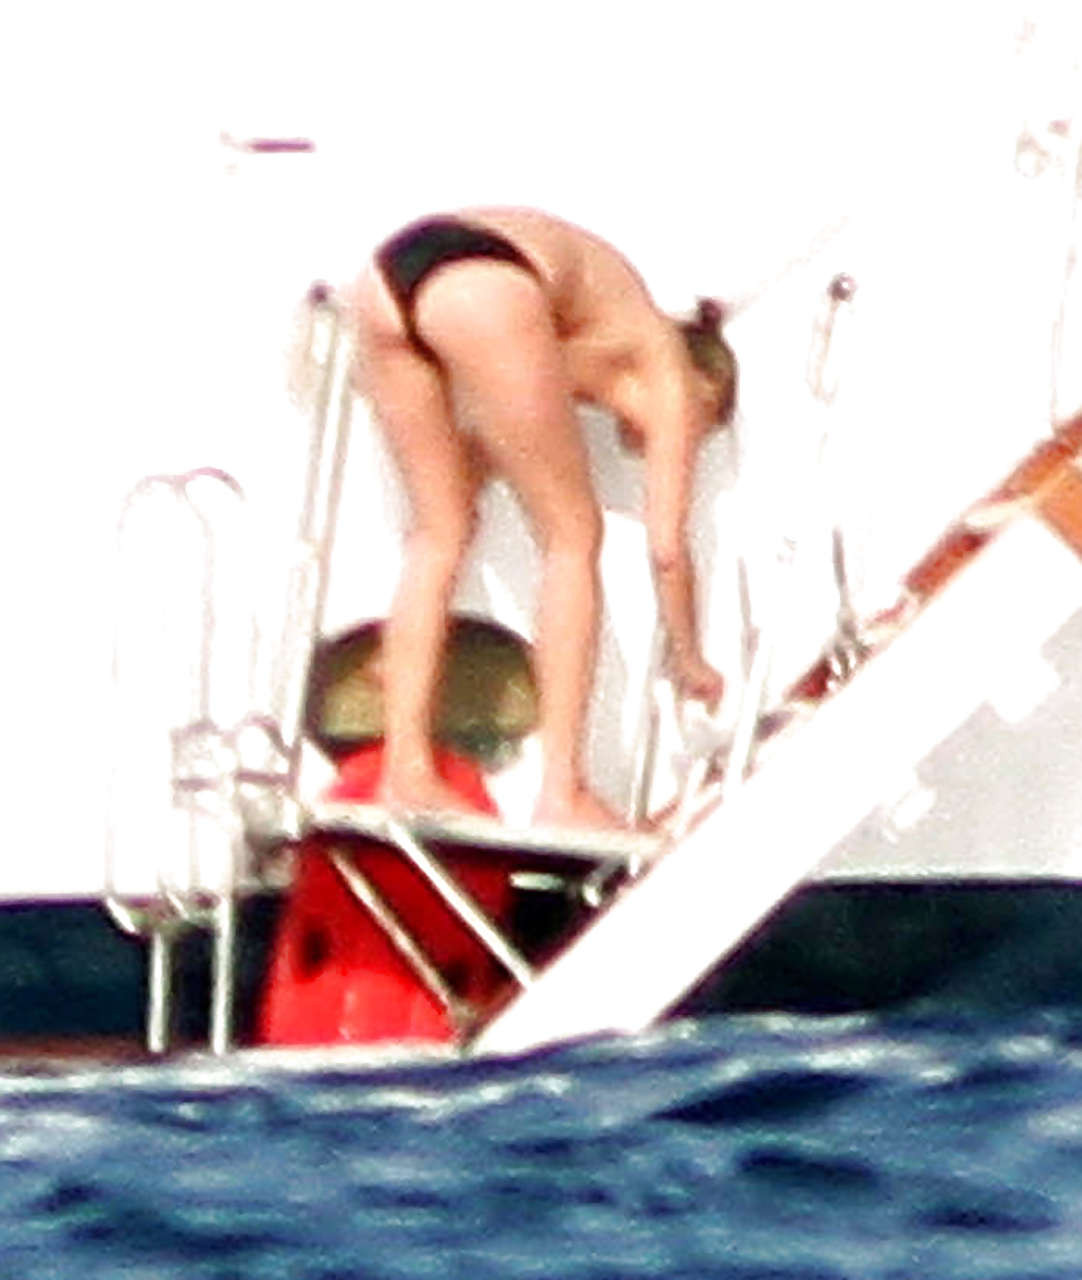 Kate Moss topless jumping from yach and showing her panties paparazzi shoots #75290687